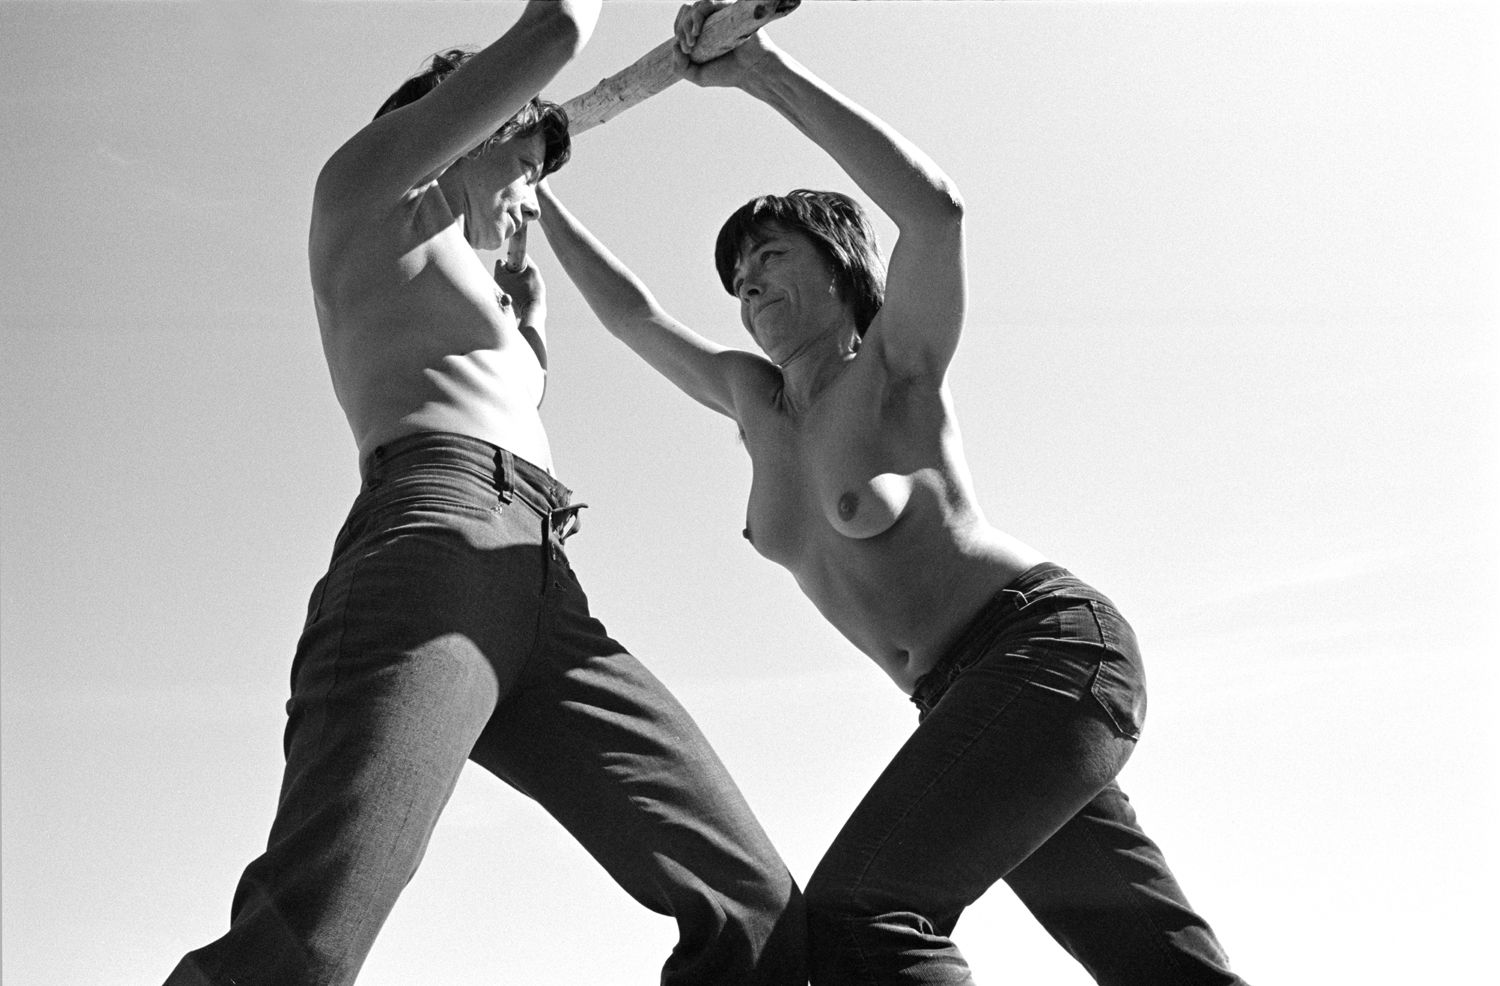 Barbara Hammer
Wrestling, Hornby Island, British Columbia, 1972 - printed 2017
Silver gelatin print
8 x 12 inches&amp;nbsp;
Courtesy of the artist and Company, New York